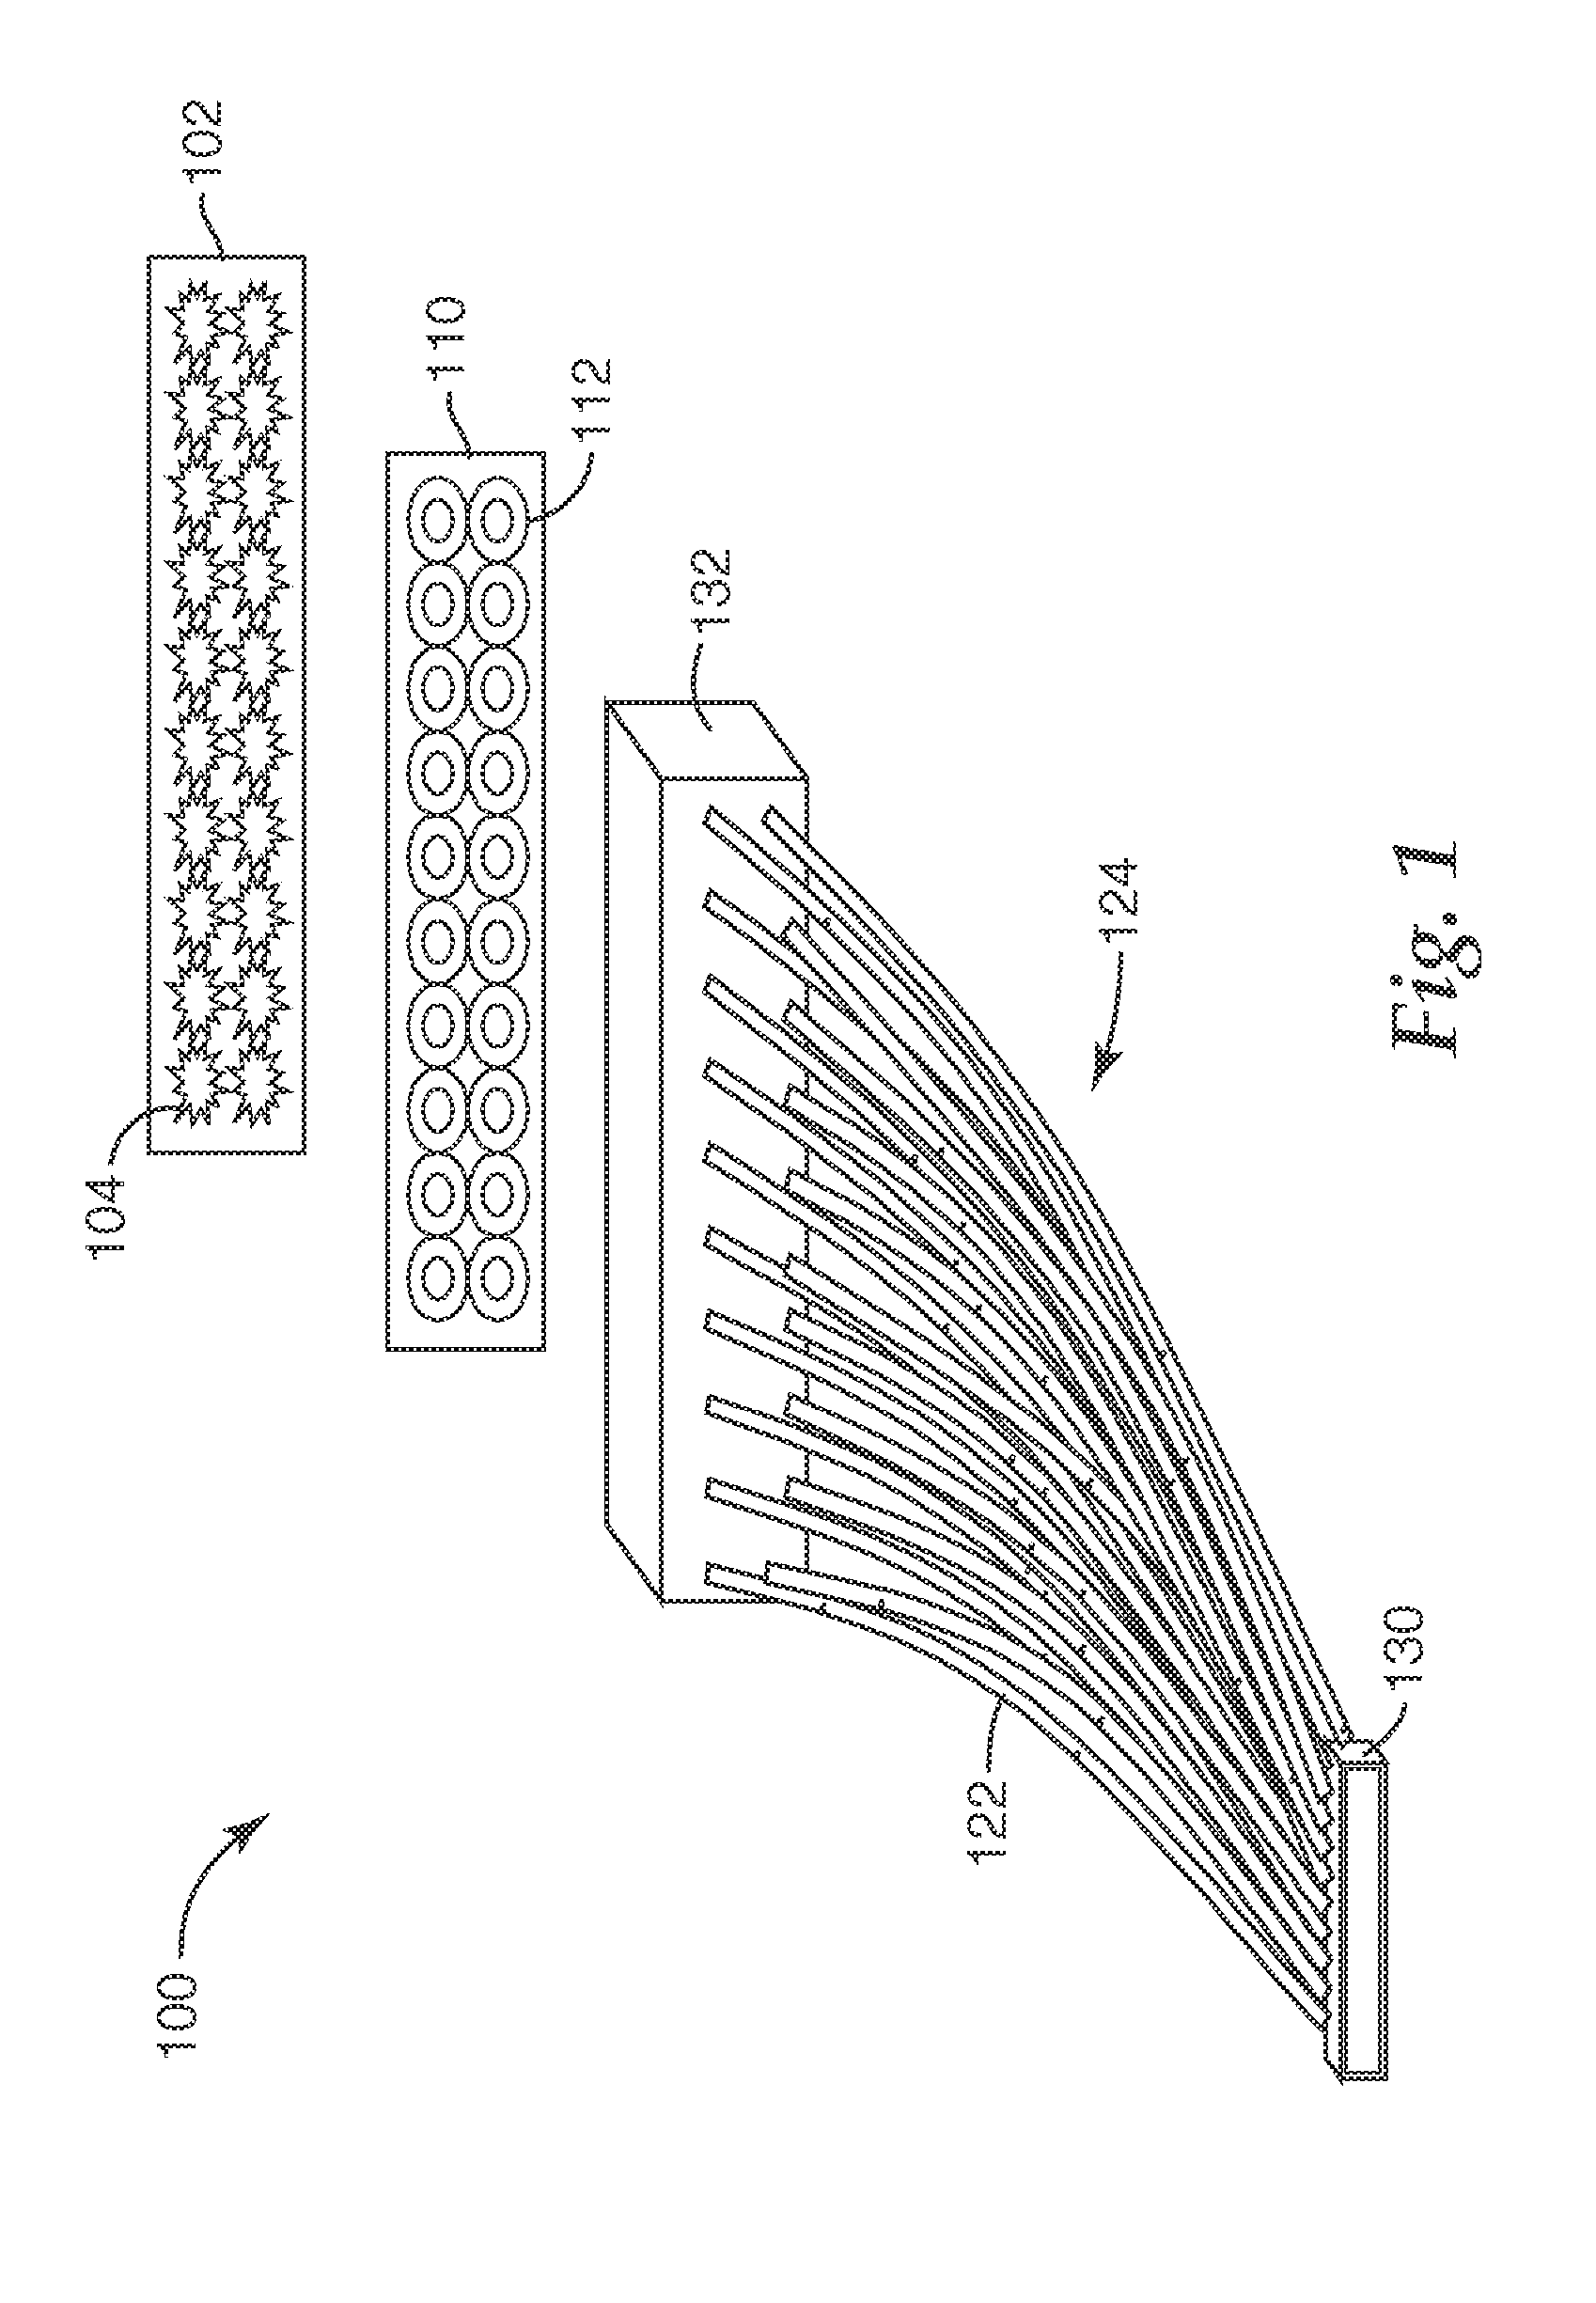 Illumination system using a plurality of light sources